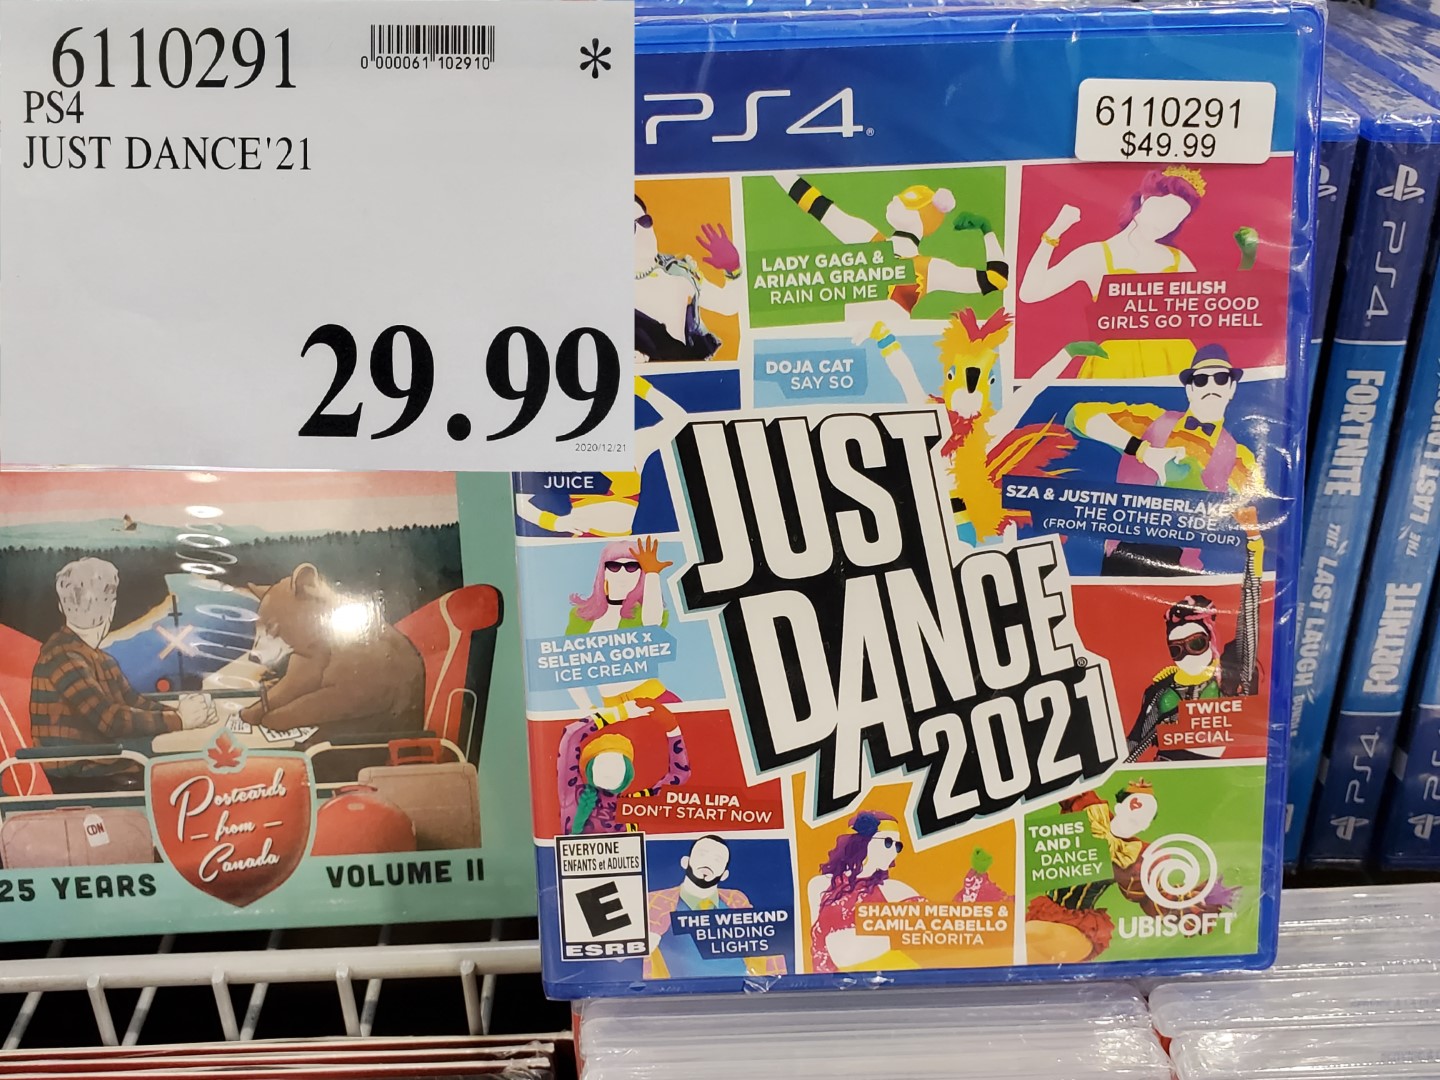 PS4 just dance 21